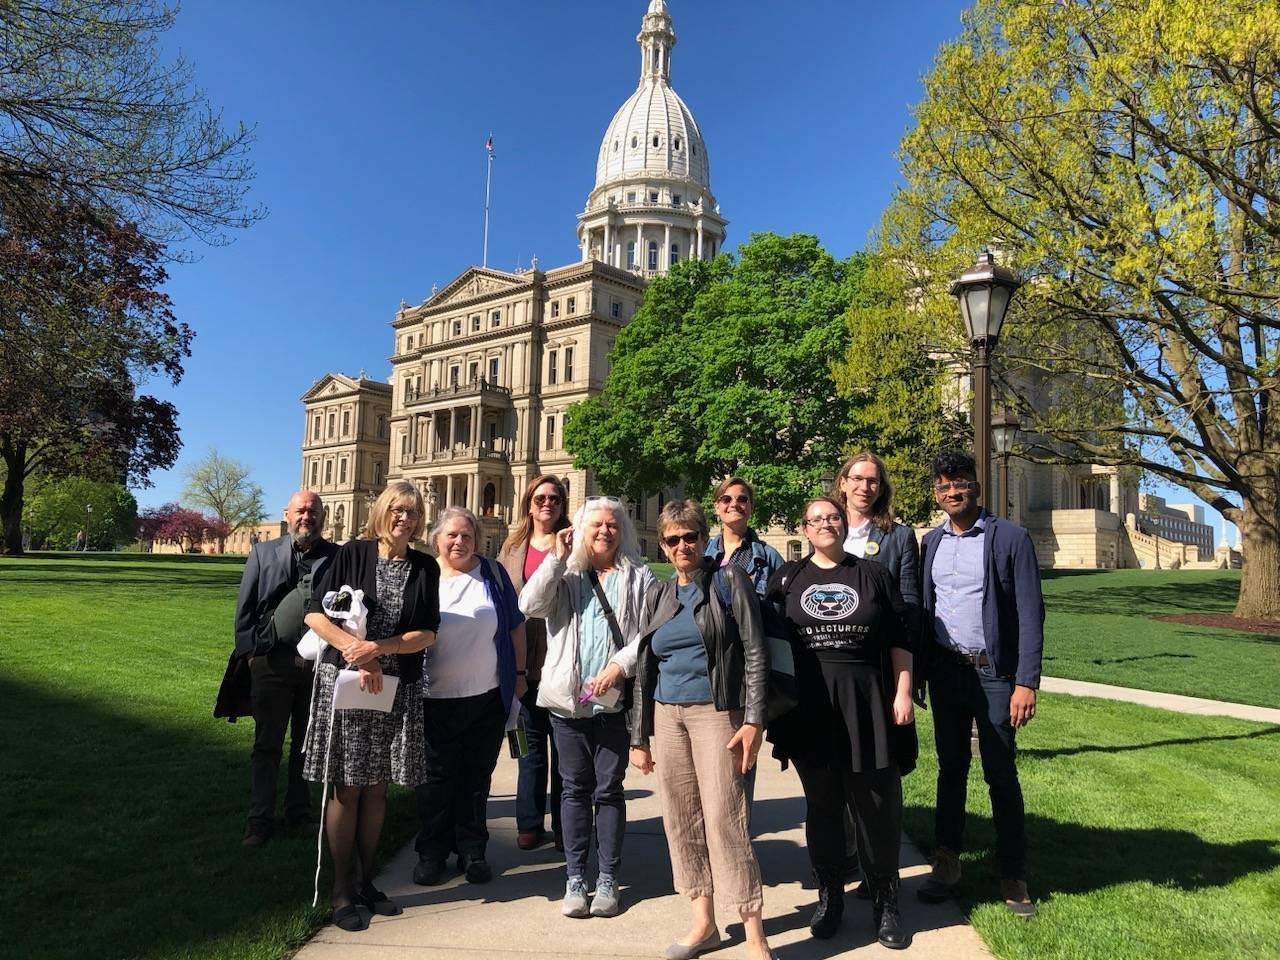 LEO members from all 3 campuses are at the capitol lobbying for more equitable funding in higher education! Dearborn and Flint lecs are sharing their personal stories to advocate for our satellite campuses with support from Ann Arbor lecturers.